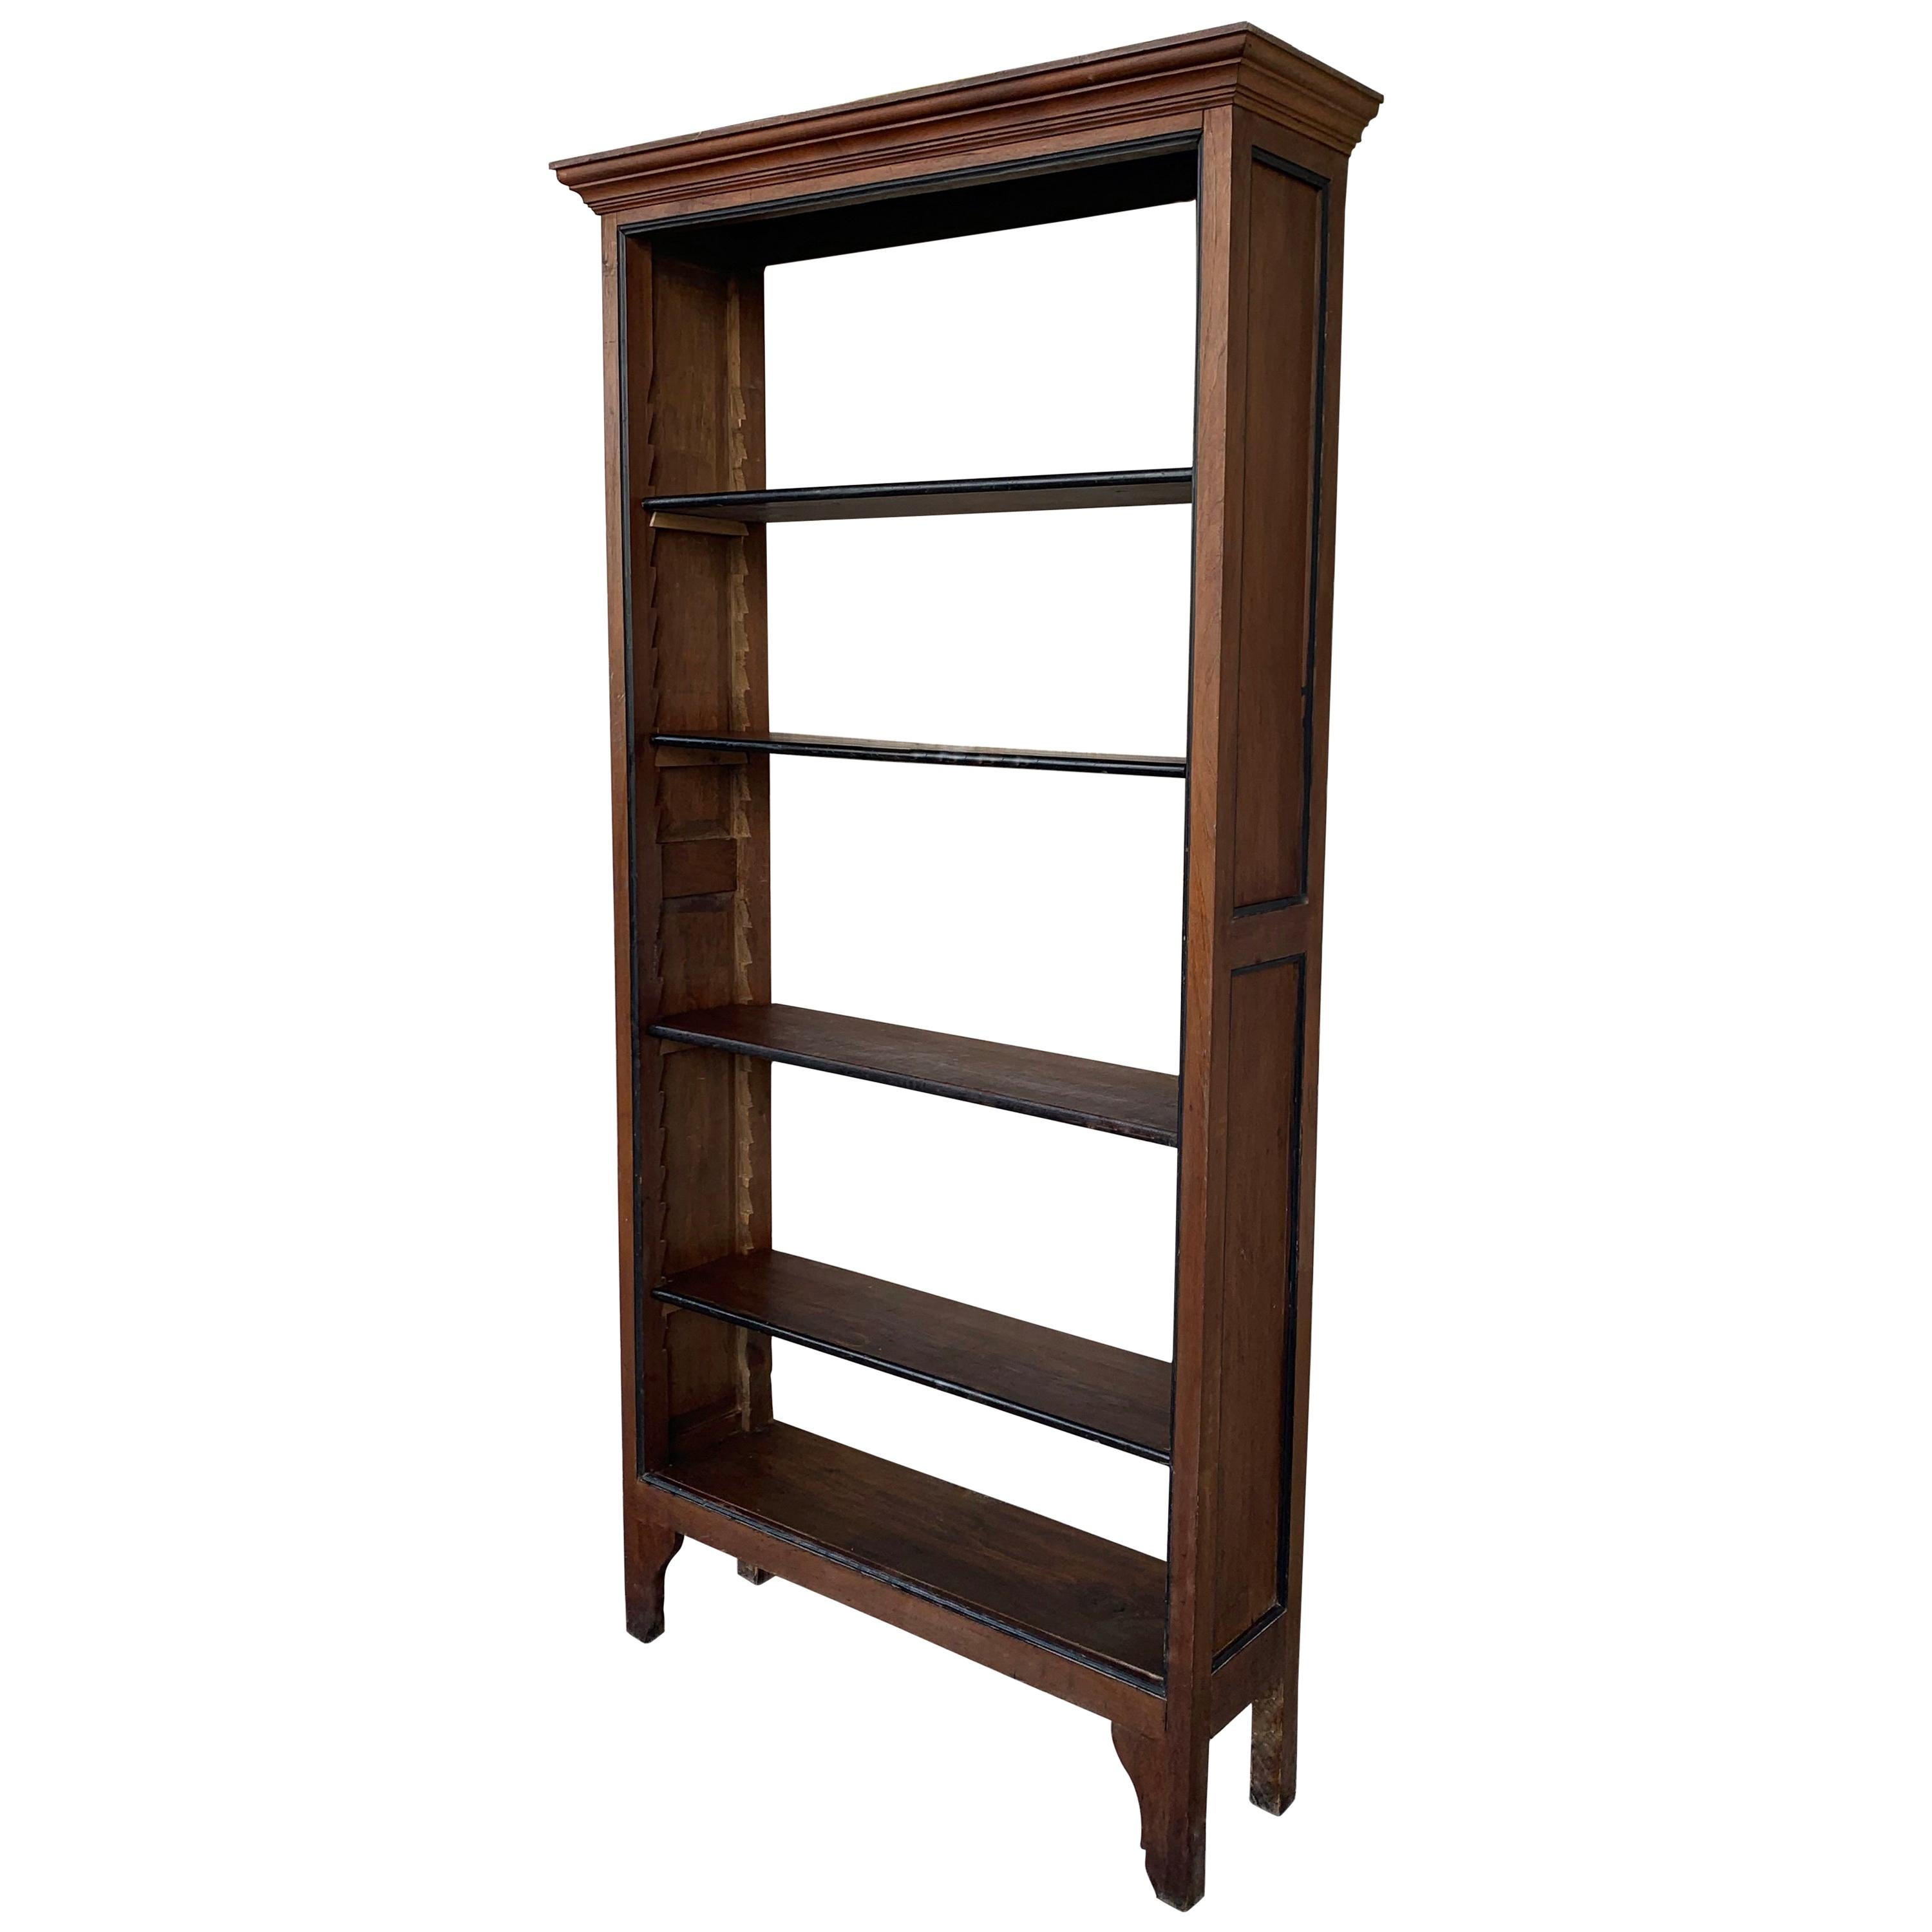 19th French Walnut & Ebonized Bookcase or Étagère with Five Adjustable Shelves